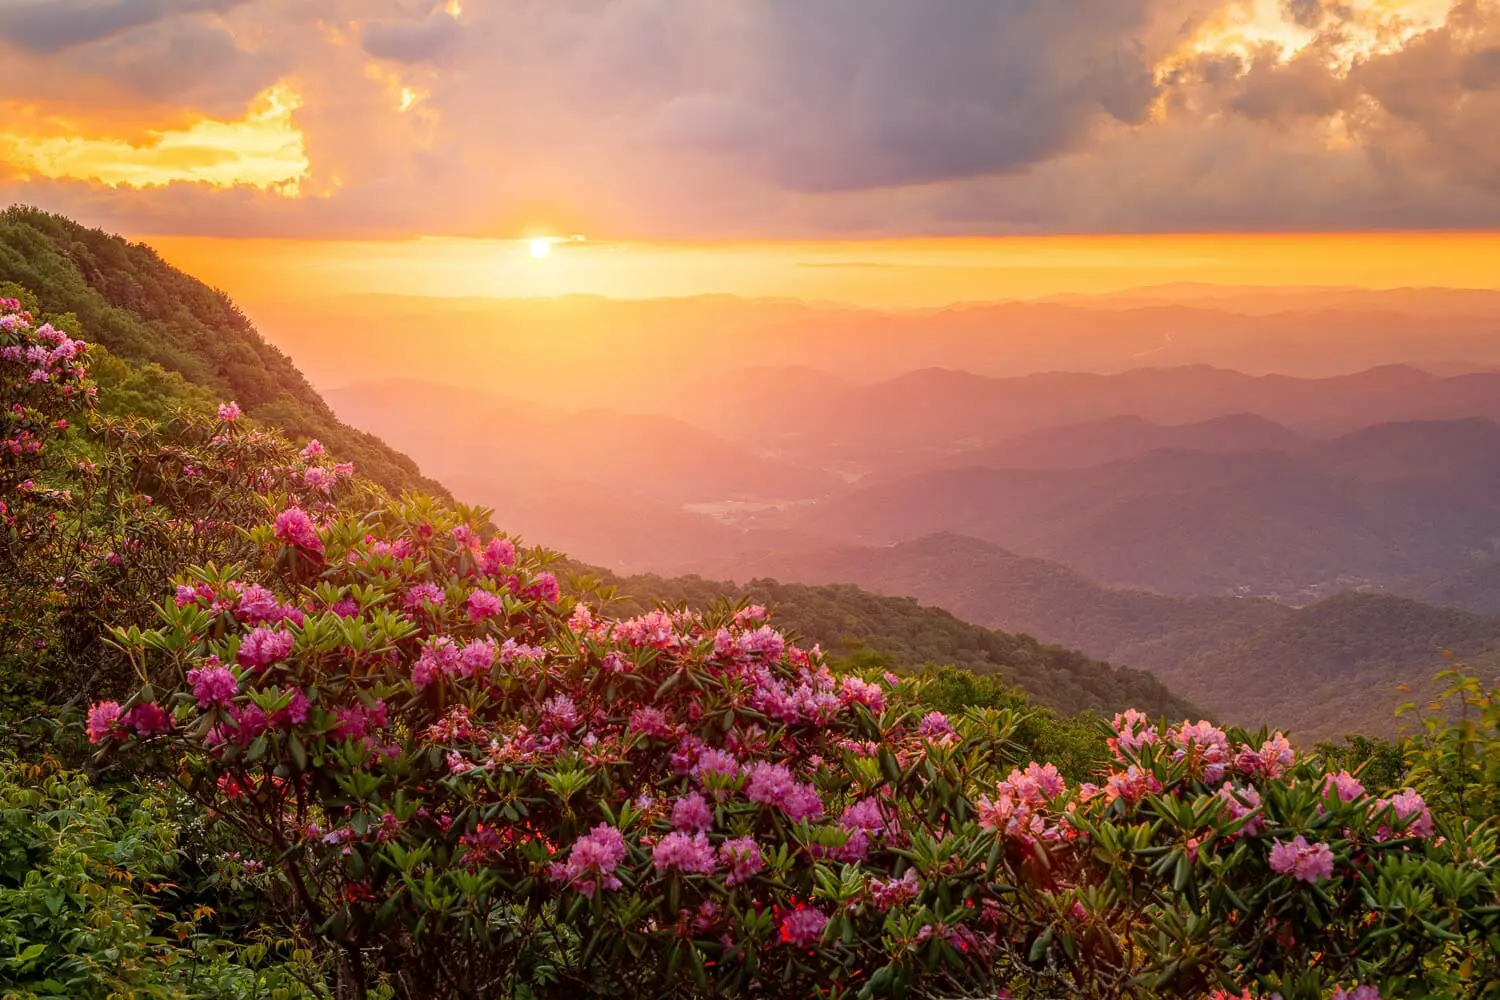 Sunset over a mountainous landscape with blooming rhododendrons in the foreground.